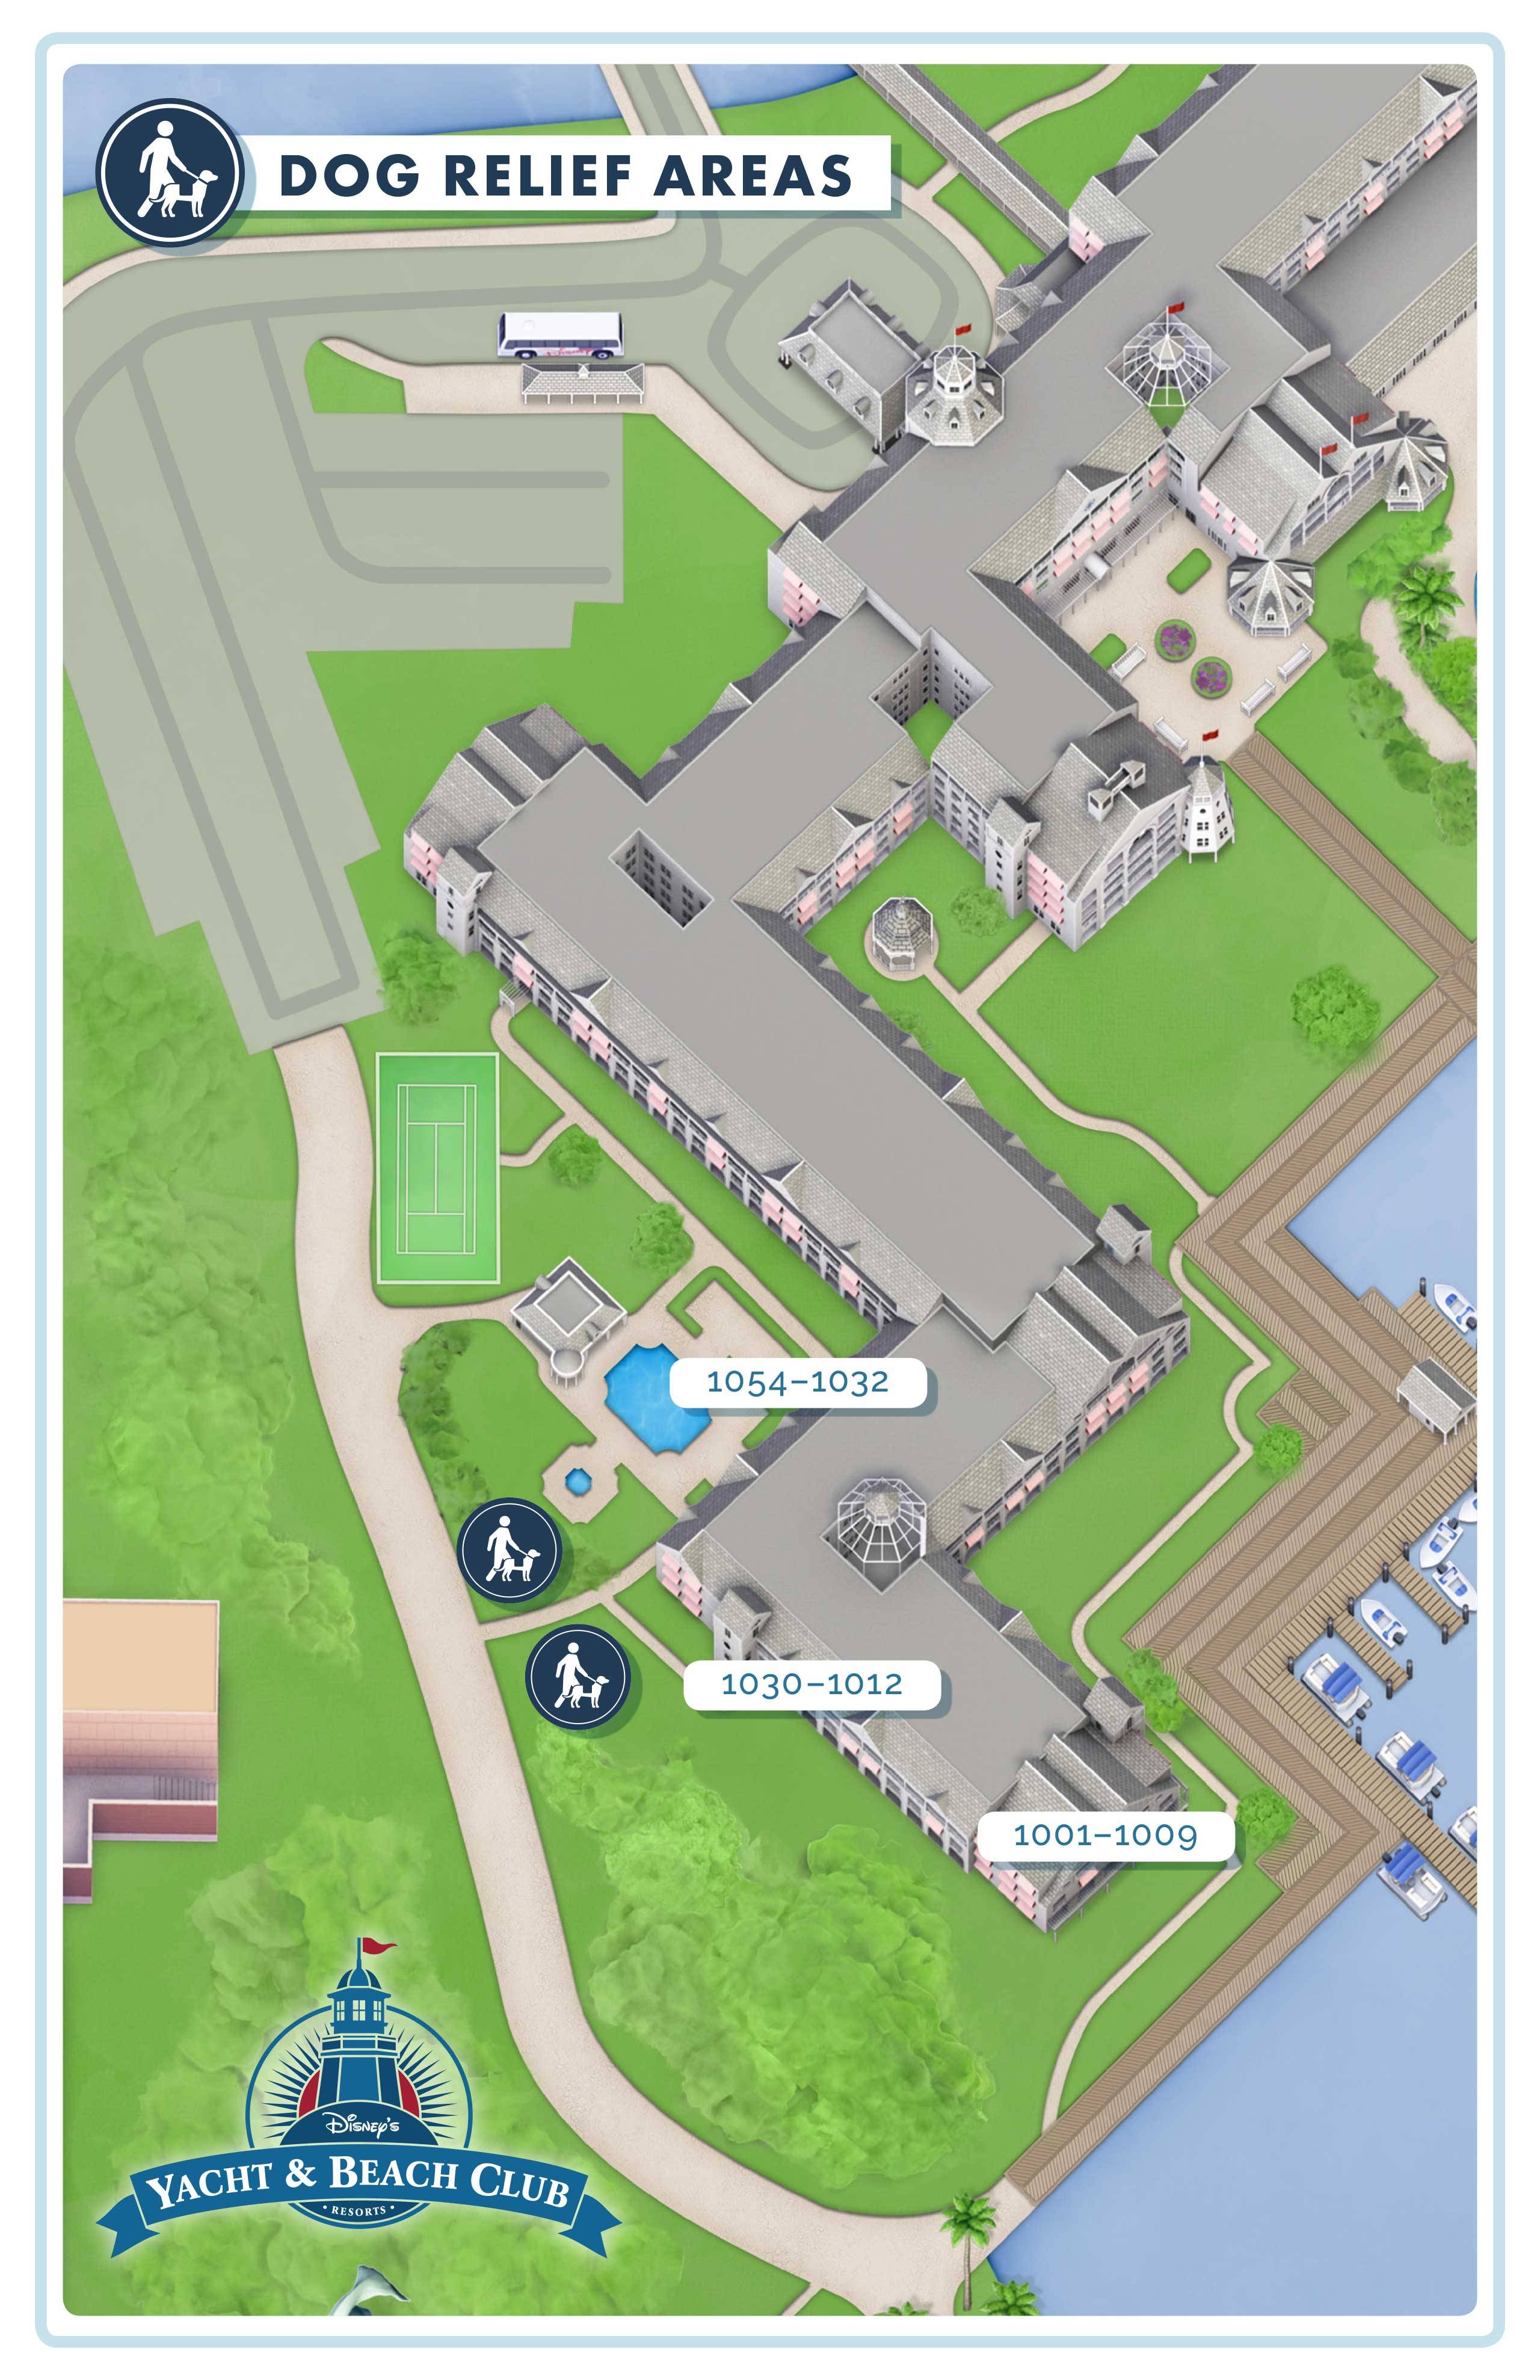 More details on Dog Policy and Dog Relief Areas at Walt Disney World Resort hotels